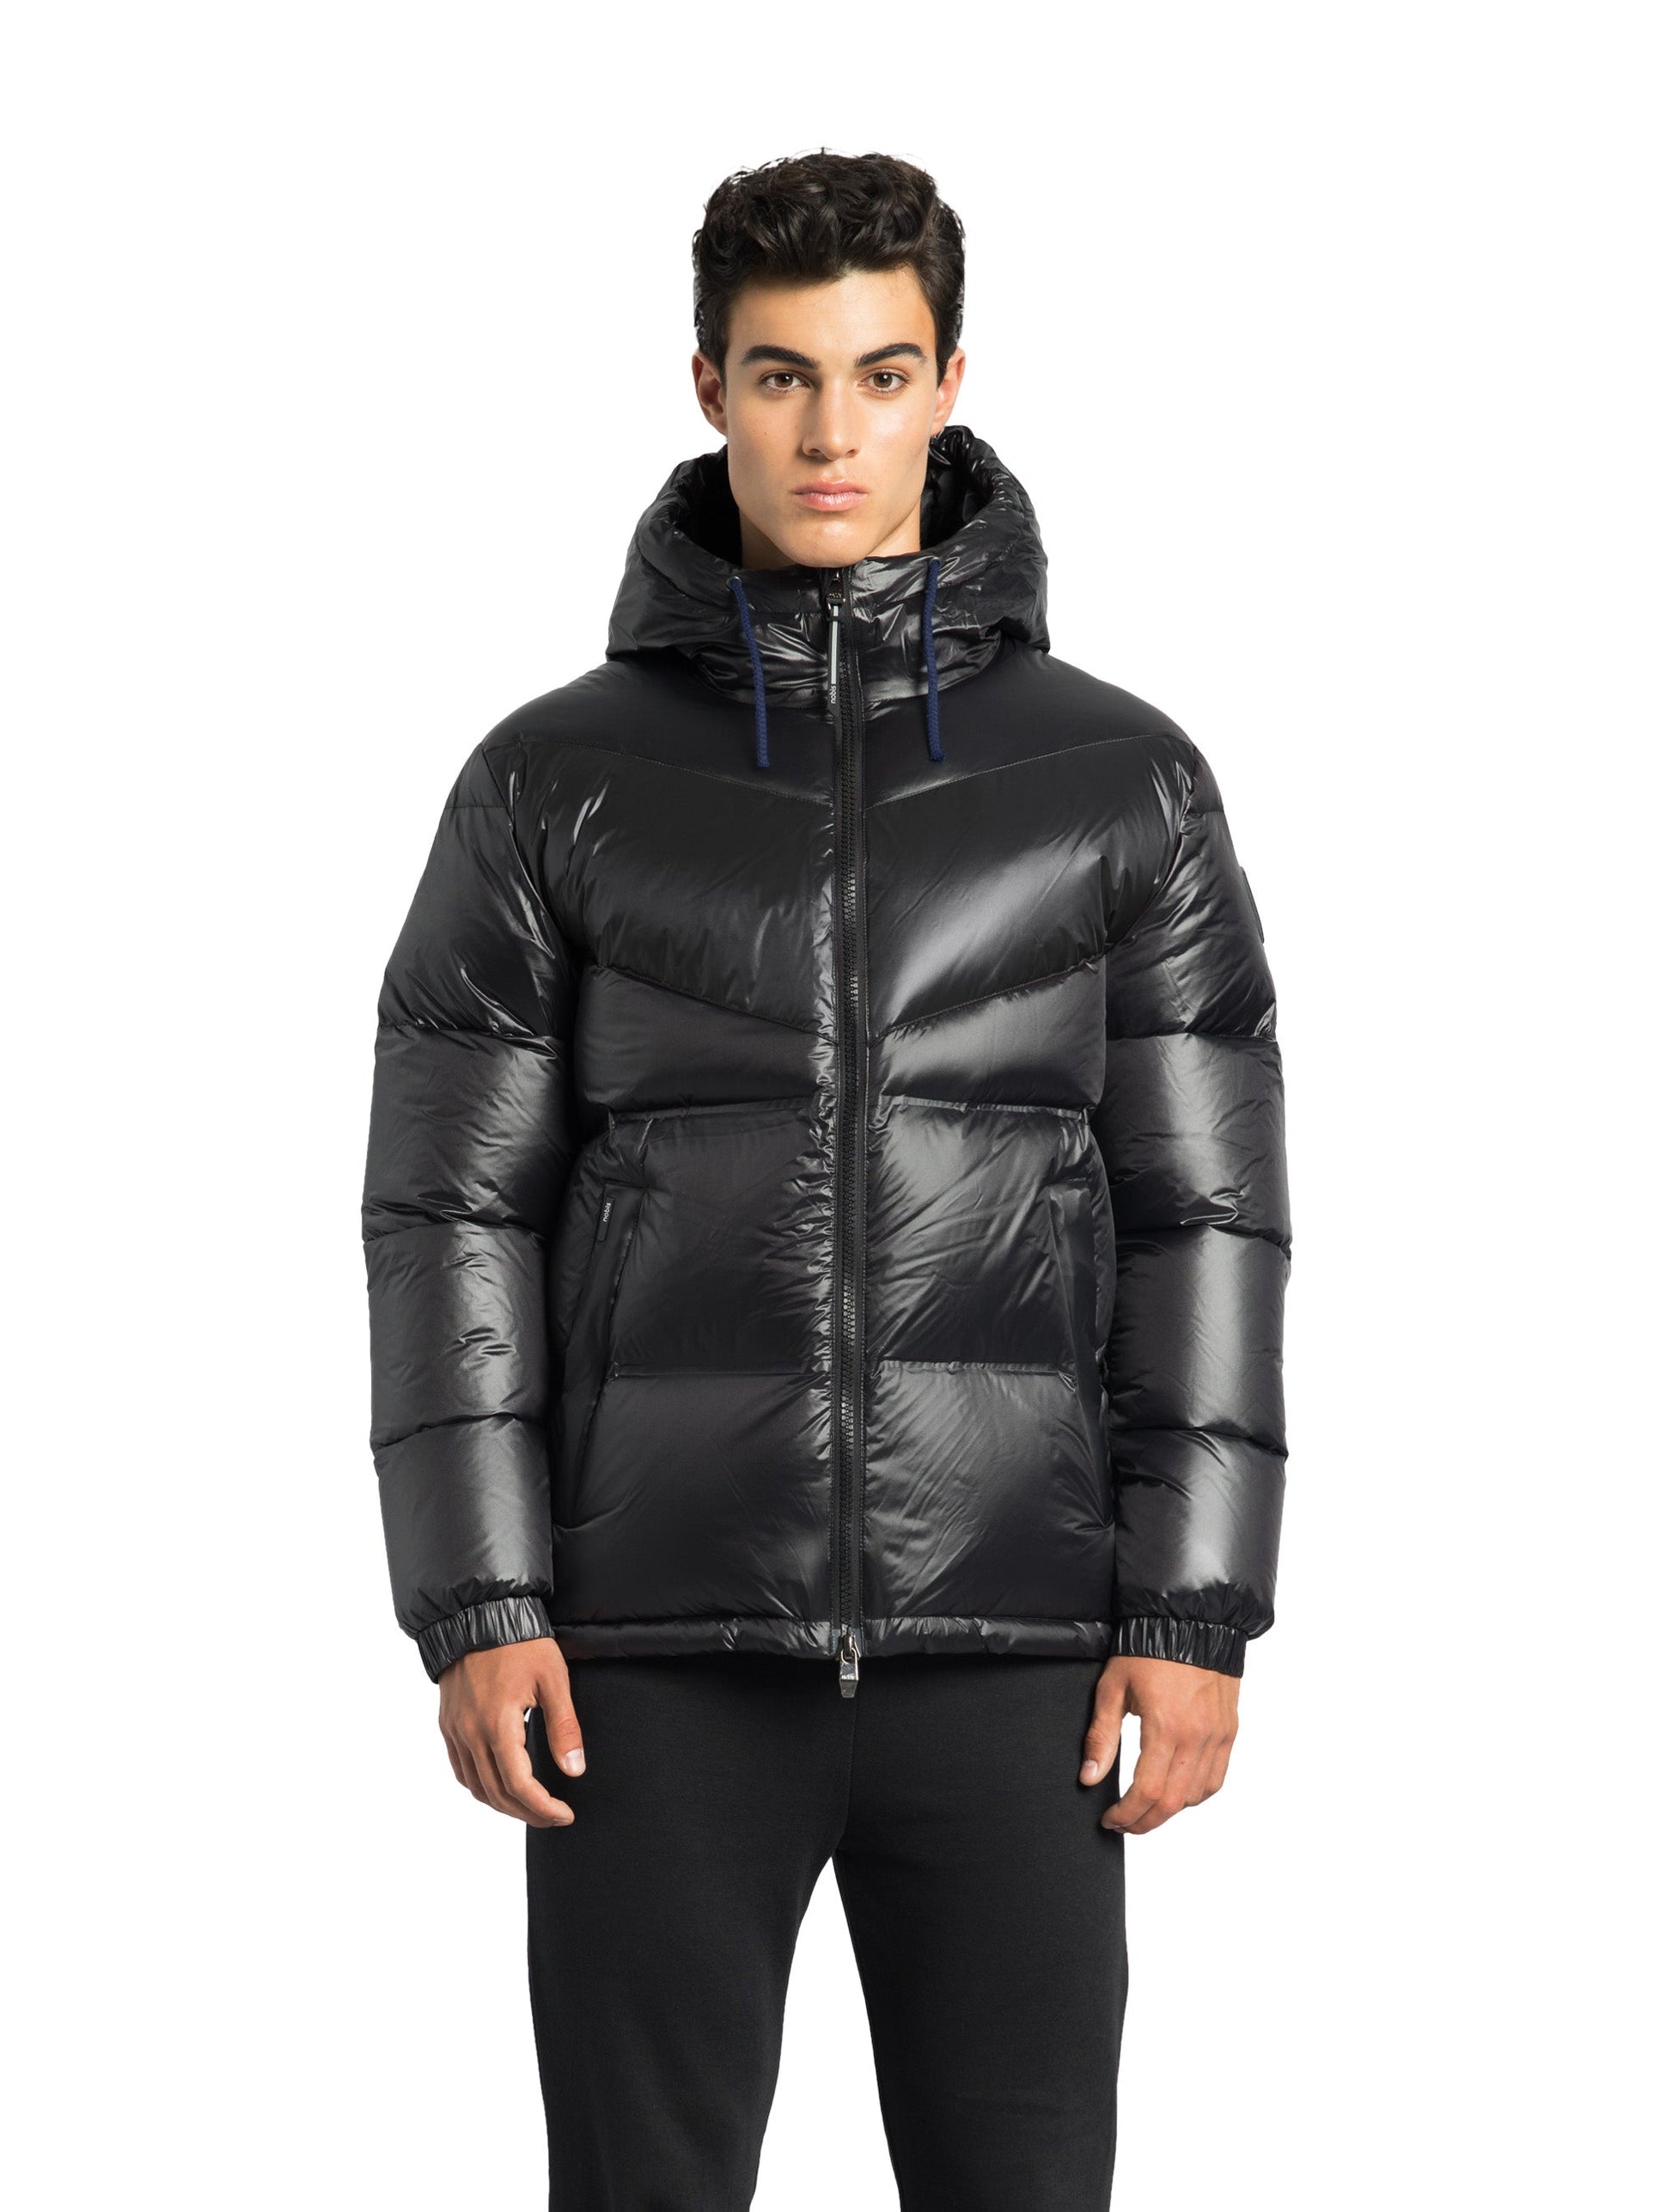 Dyna Men's Chevron Quilted Puffer Jacket in hip length, premium cire technical nylon taffeta fabrication, Premium Canadian origin White Duck Down insulation, non-removable down-filled hood, two-way centre-front zipper, fleece-lined zipper pockets at waist, pit zipper vents, in Black